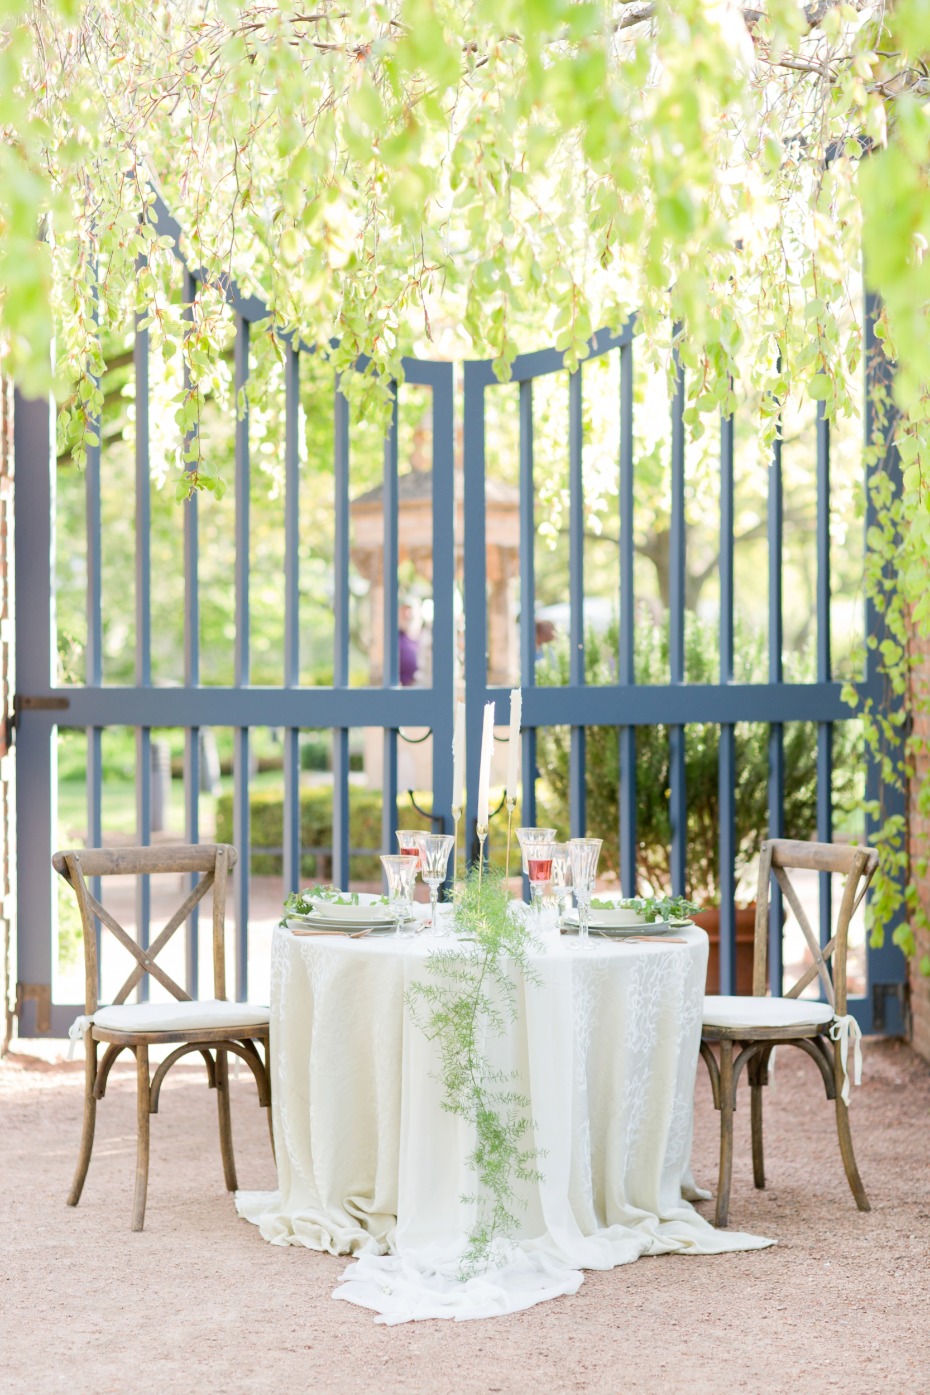 Sweetheart table in the garden